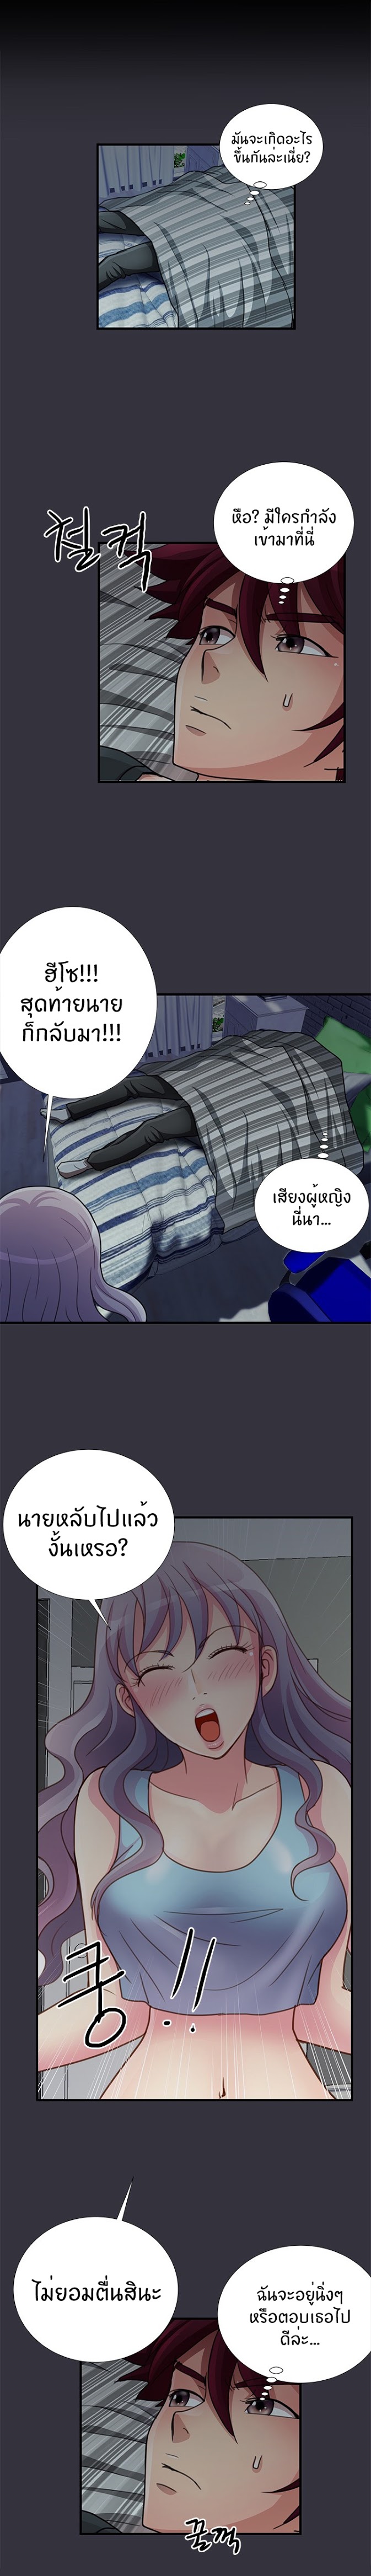 Will You Do as I Say? - หน้า 5